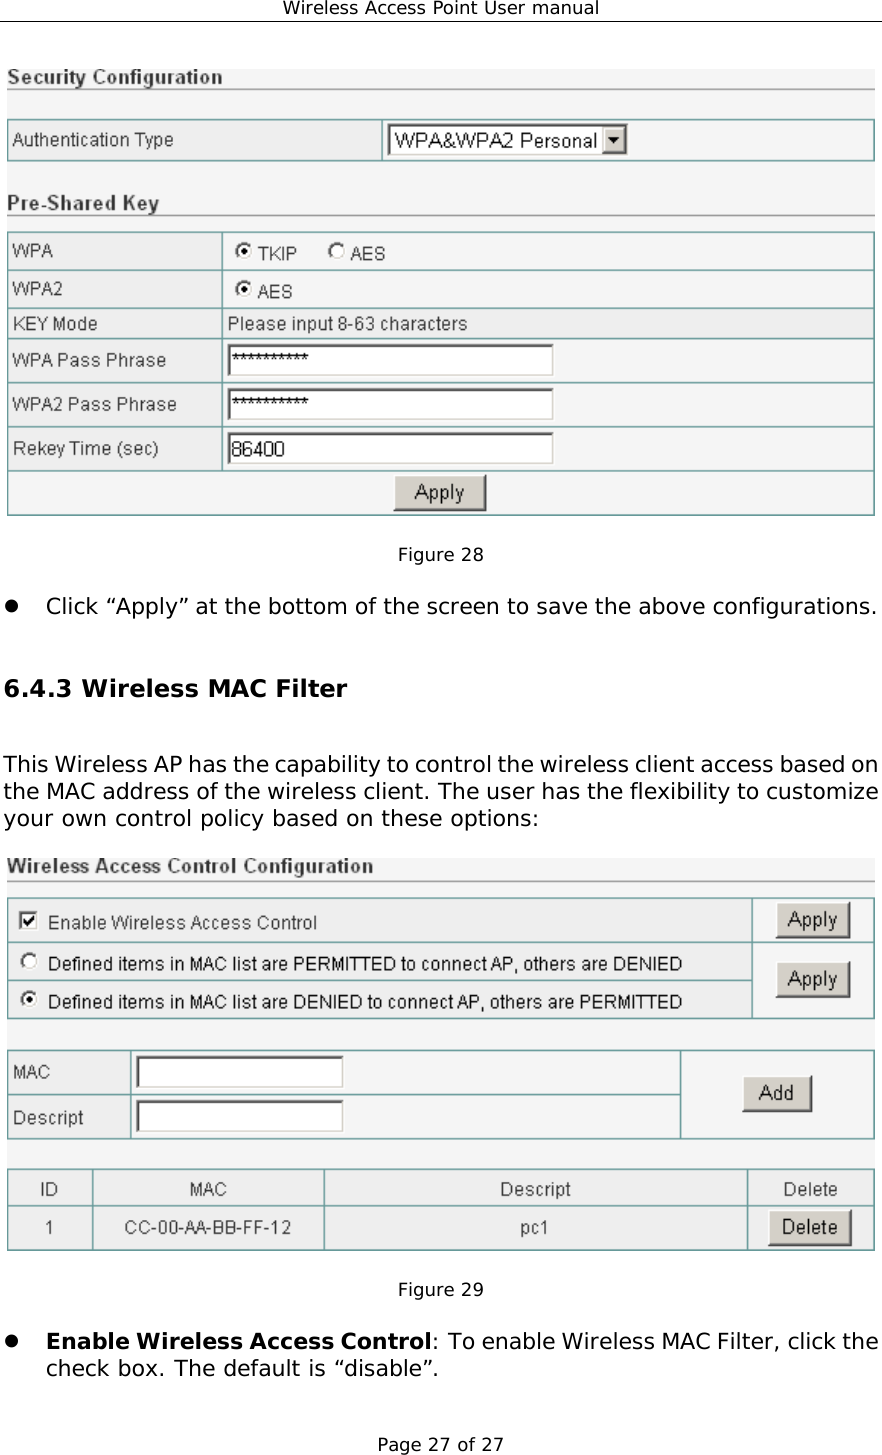 Wireless Access Point User manual Page 27 of 27   Figure 28    Click “Apply” at the bottom of the screen to save the above configurations.  6.4.3 Wireless MAC Filter This Wireless AP has the capability to control the wireless client access based on the MAC address of the wireless client. The user has the flexibility to customize your own control policy based on these options:    Figure 29    Enable Wireless Access Control: To enable Wireless MAC Filter, click the check box. The default is “disable”. 